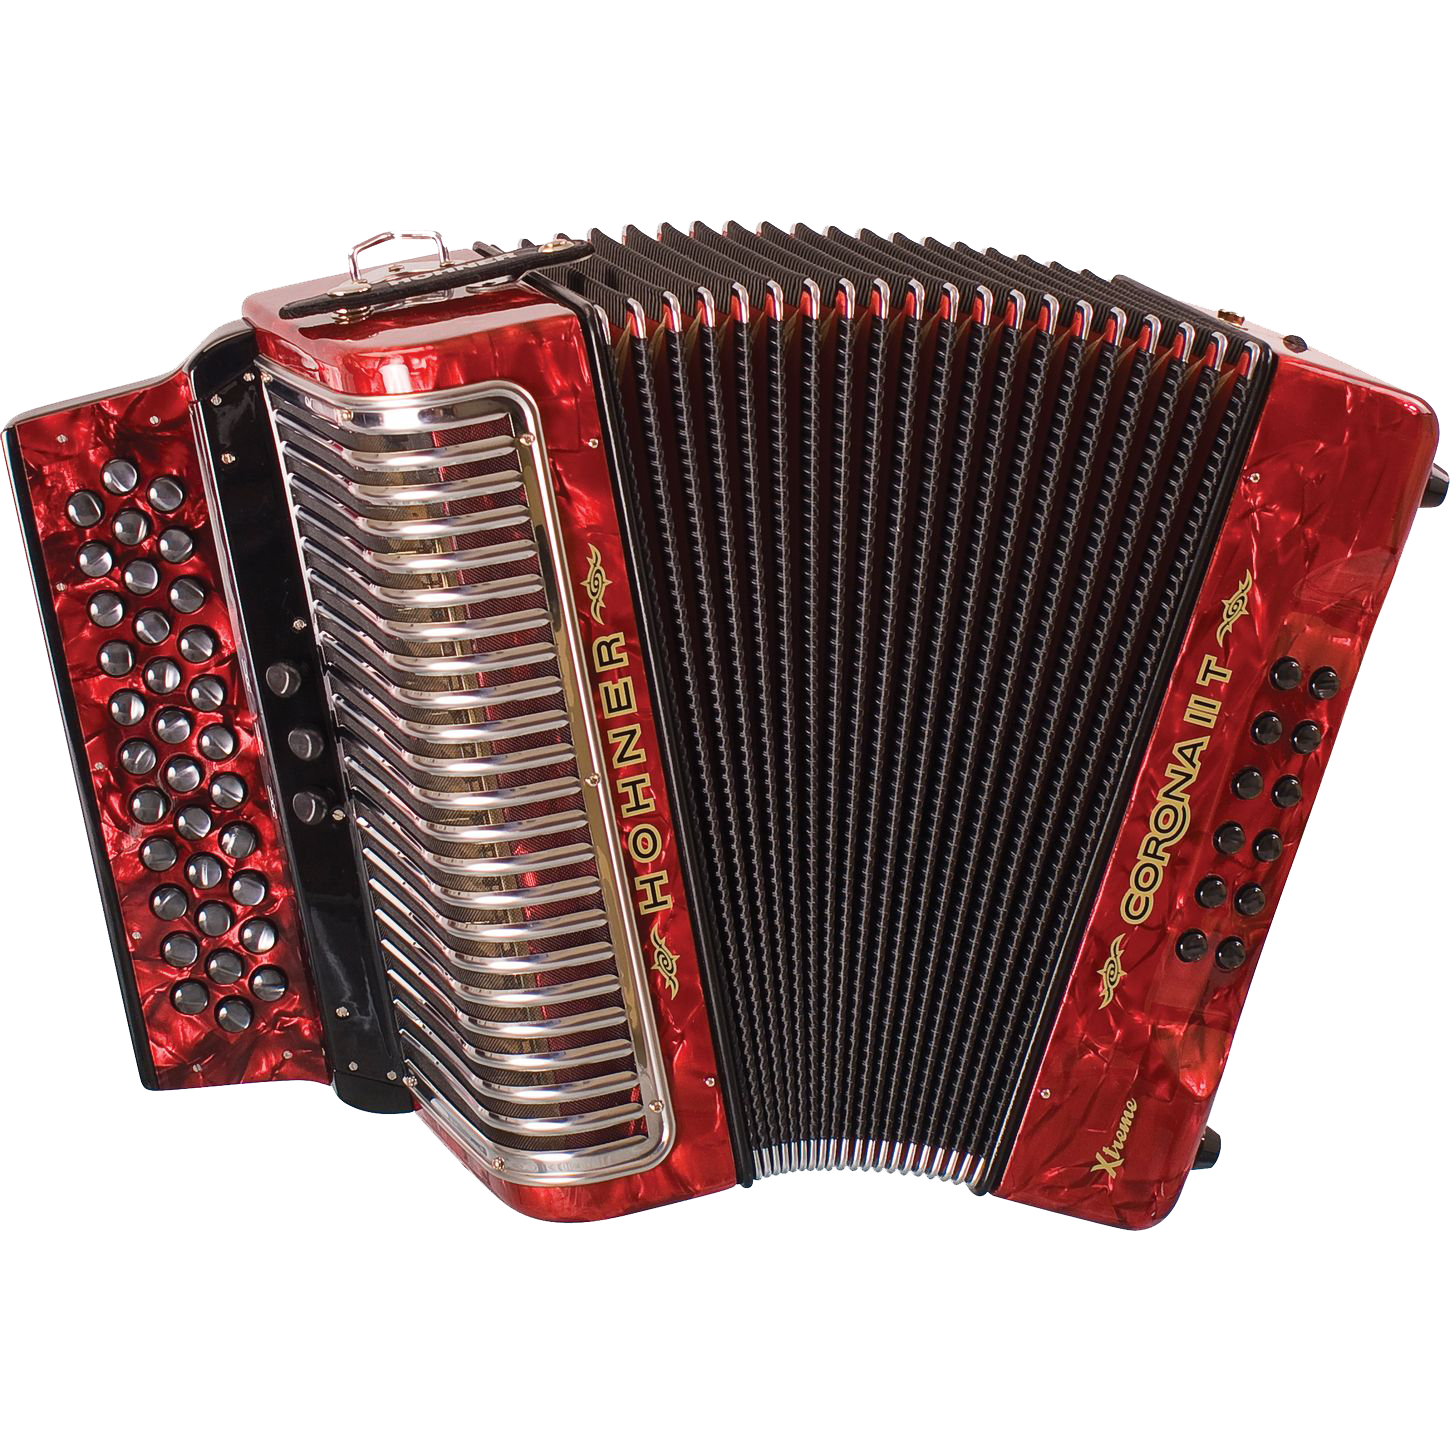 Accordion Png Clipart - Accordion, Transparent background PNG HD thumbnail